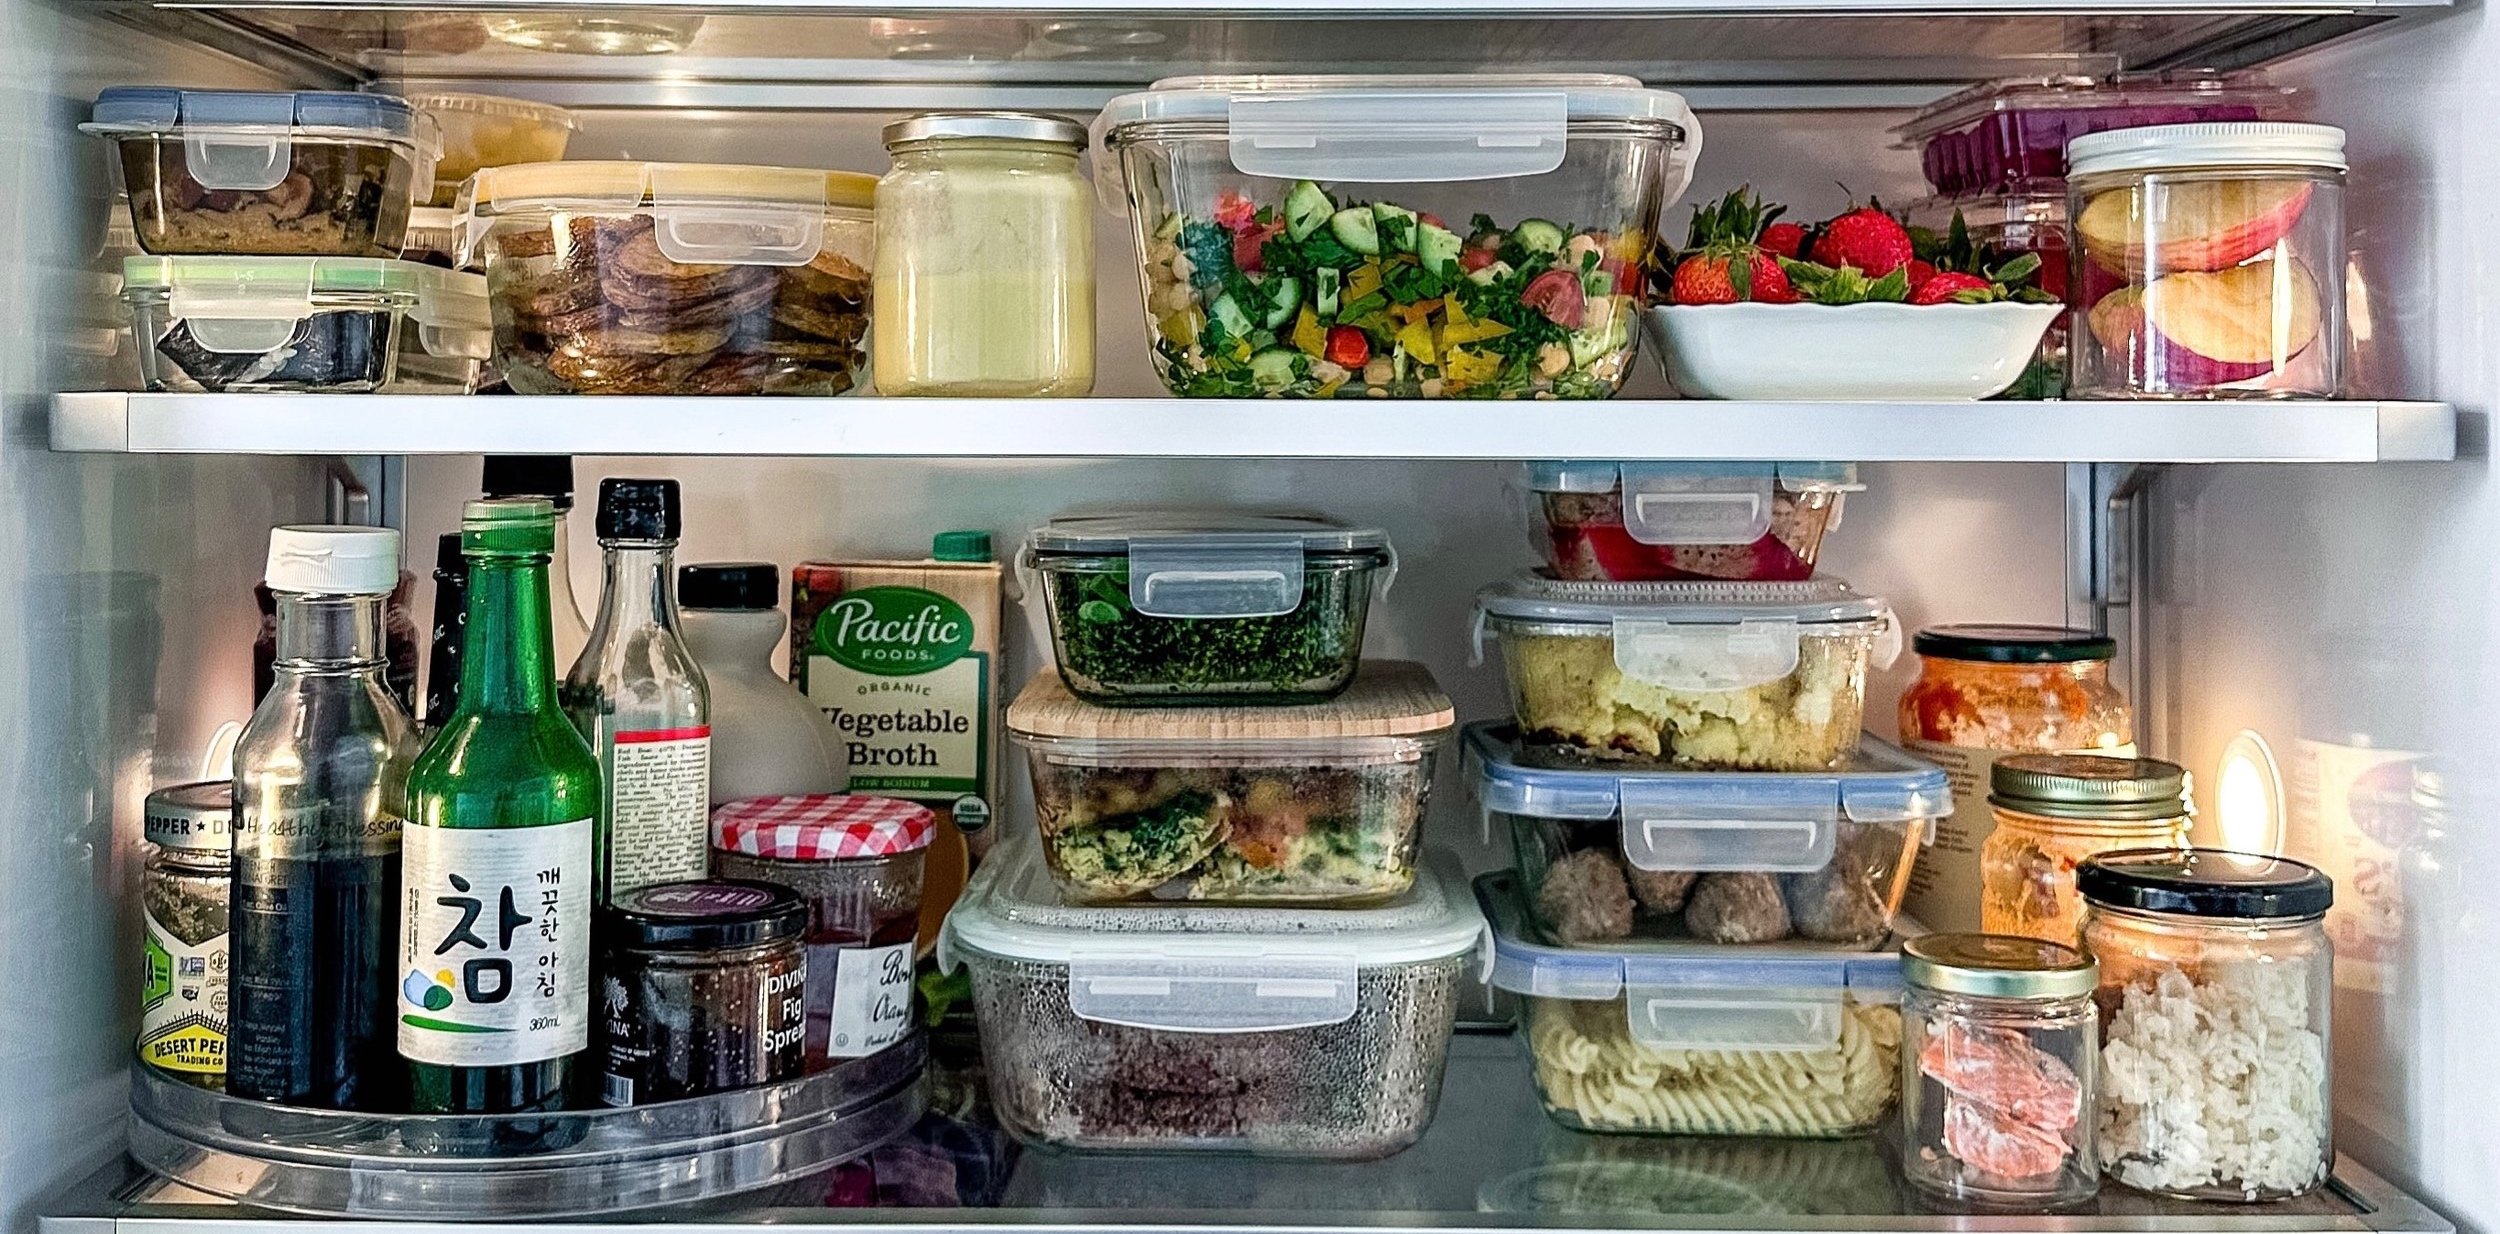 Tips for Buying Prepared Foods, According to a Whole Foods Prep Cook